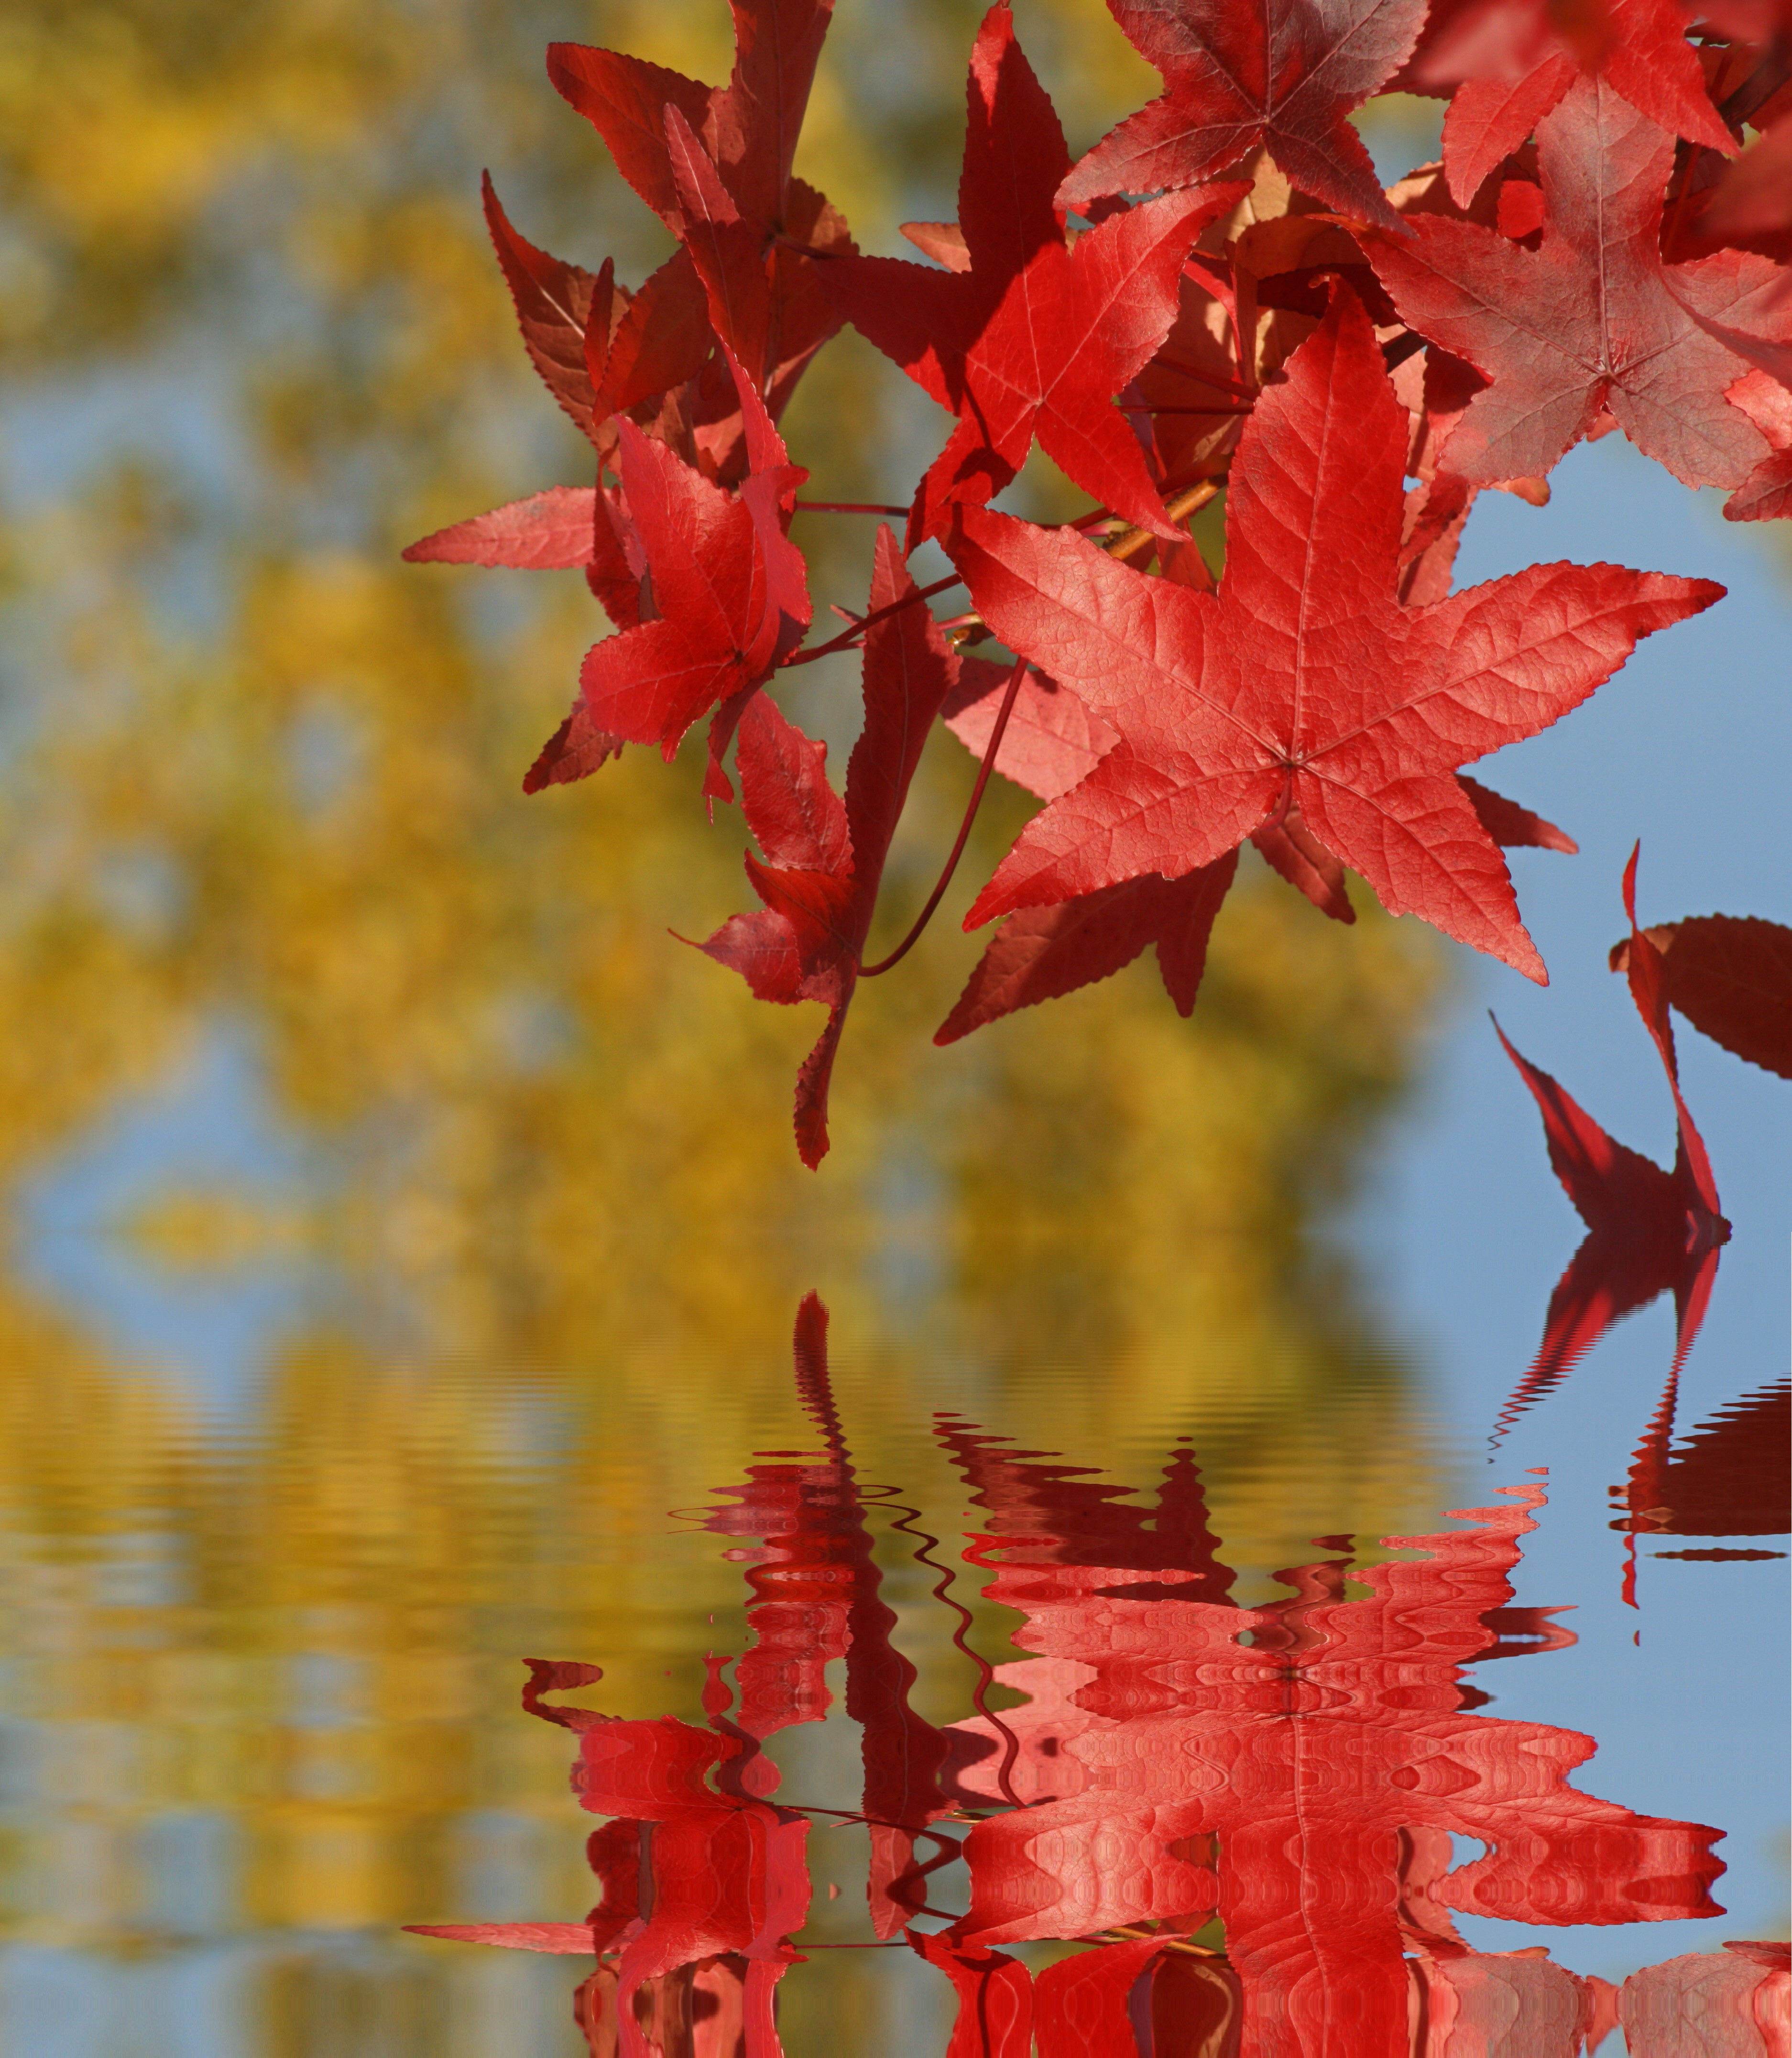 Autumn photo of bright red maple leaves and their reflection in the water